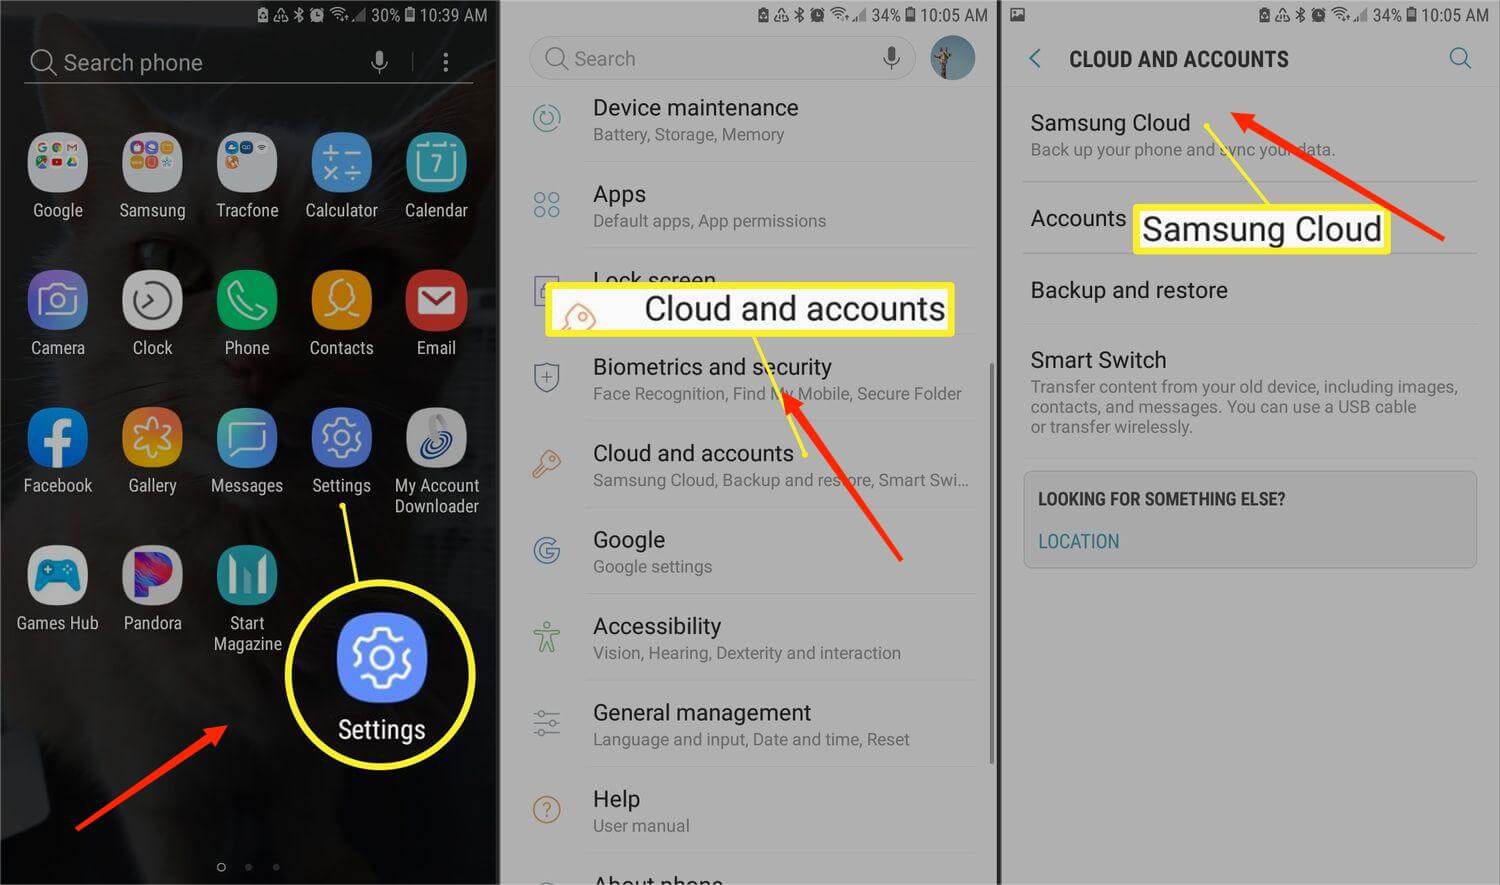  backup your data to the Samsung cloud.